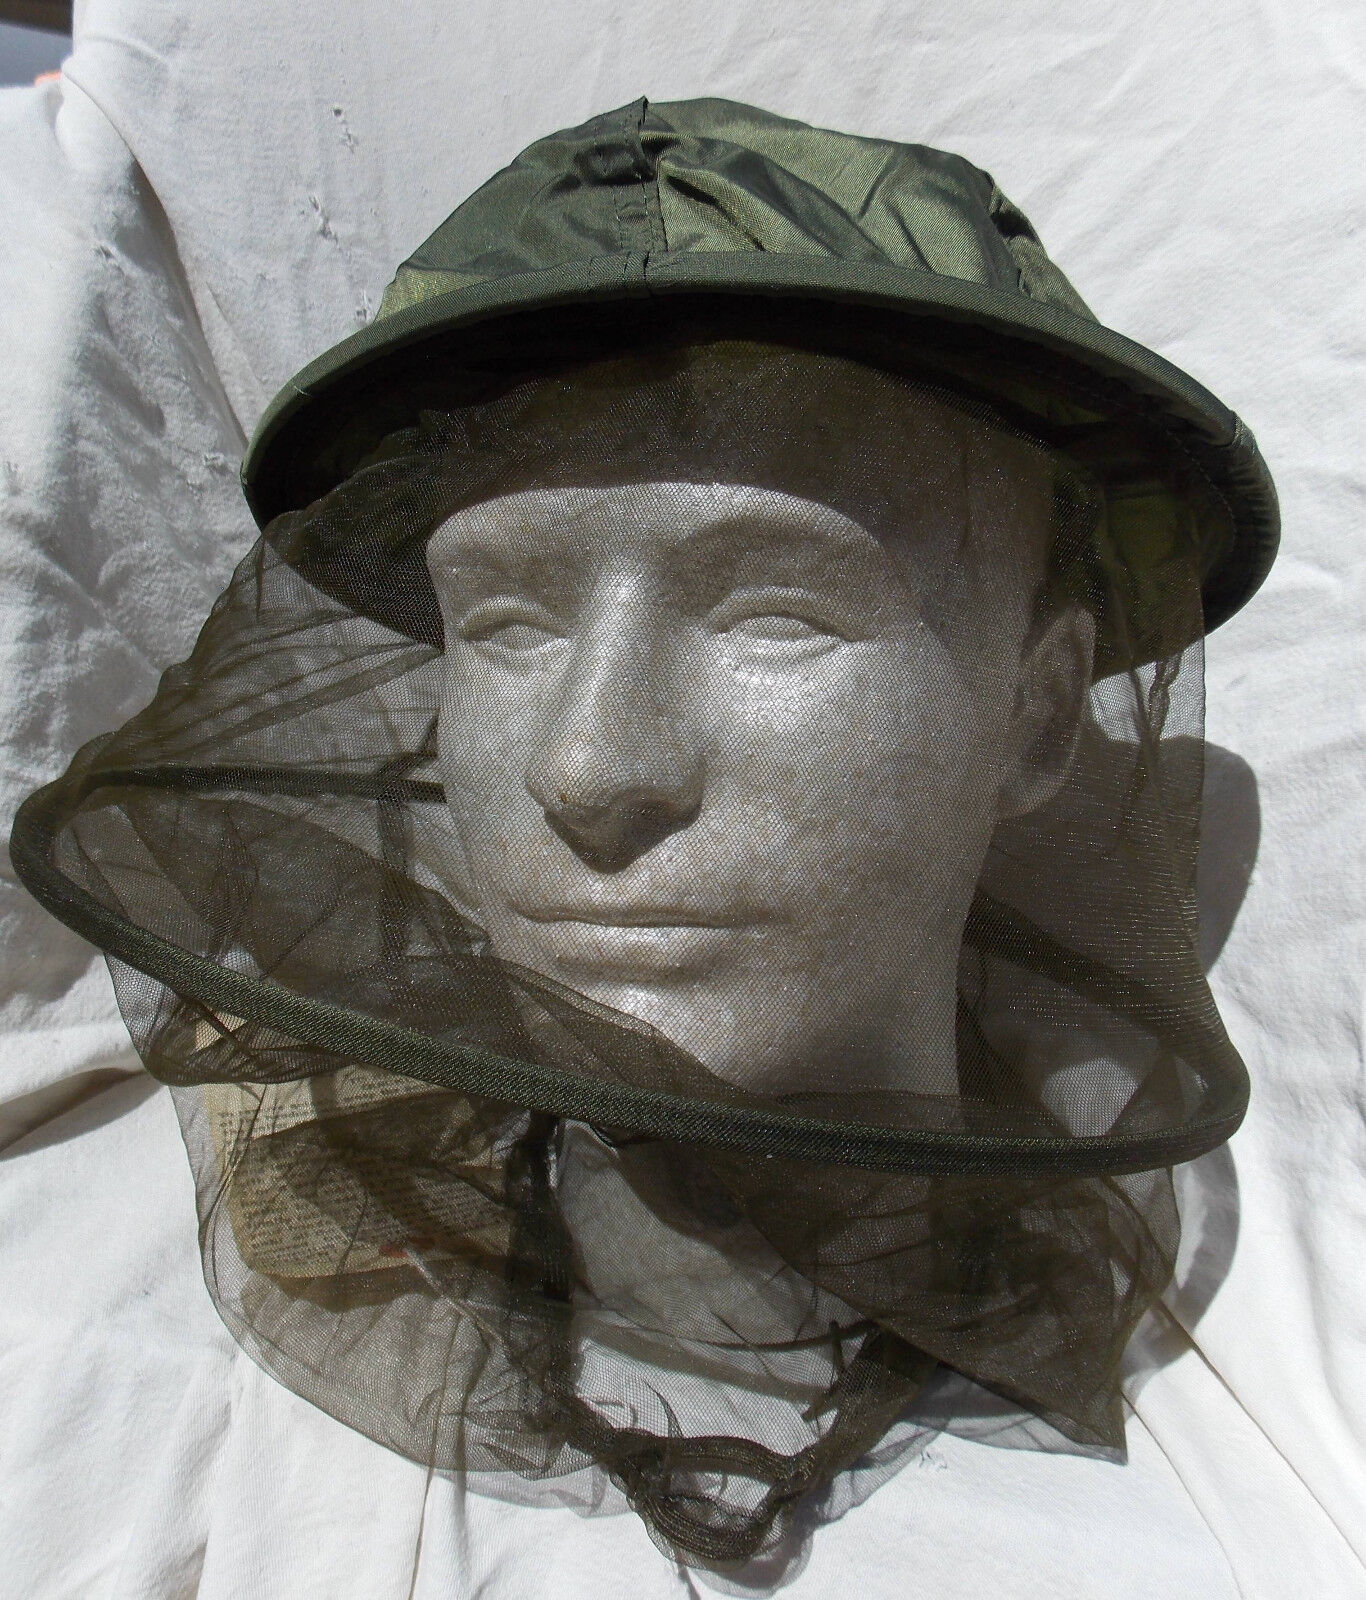 USAF USN USMC Pilot's Survival Gear Insect Mosquito Net Headnet , Excellent